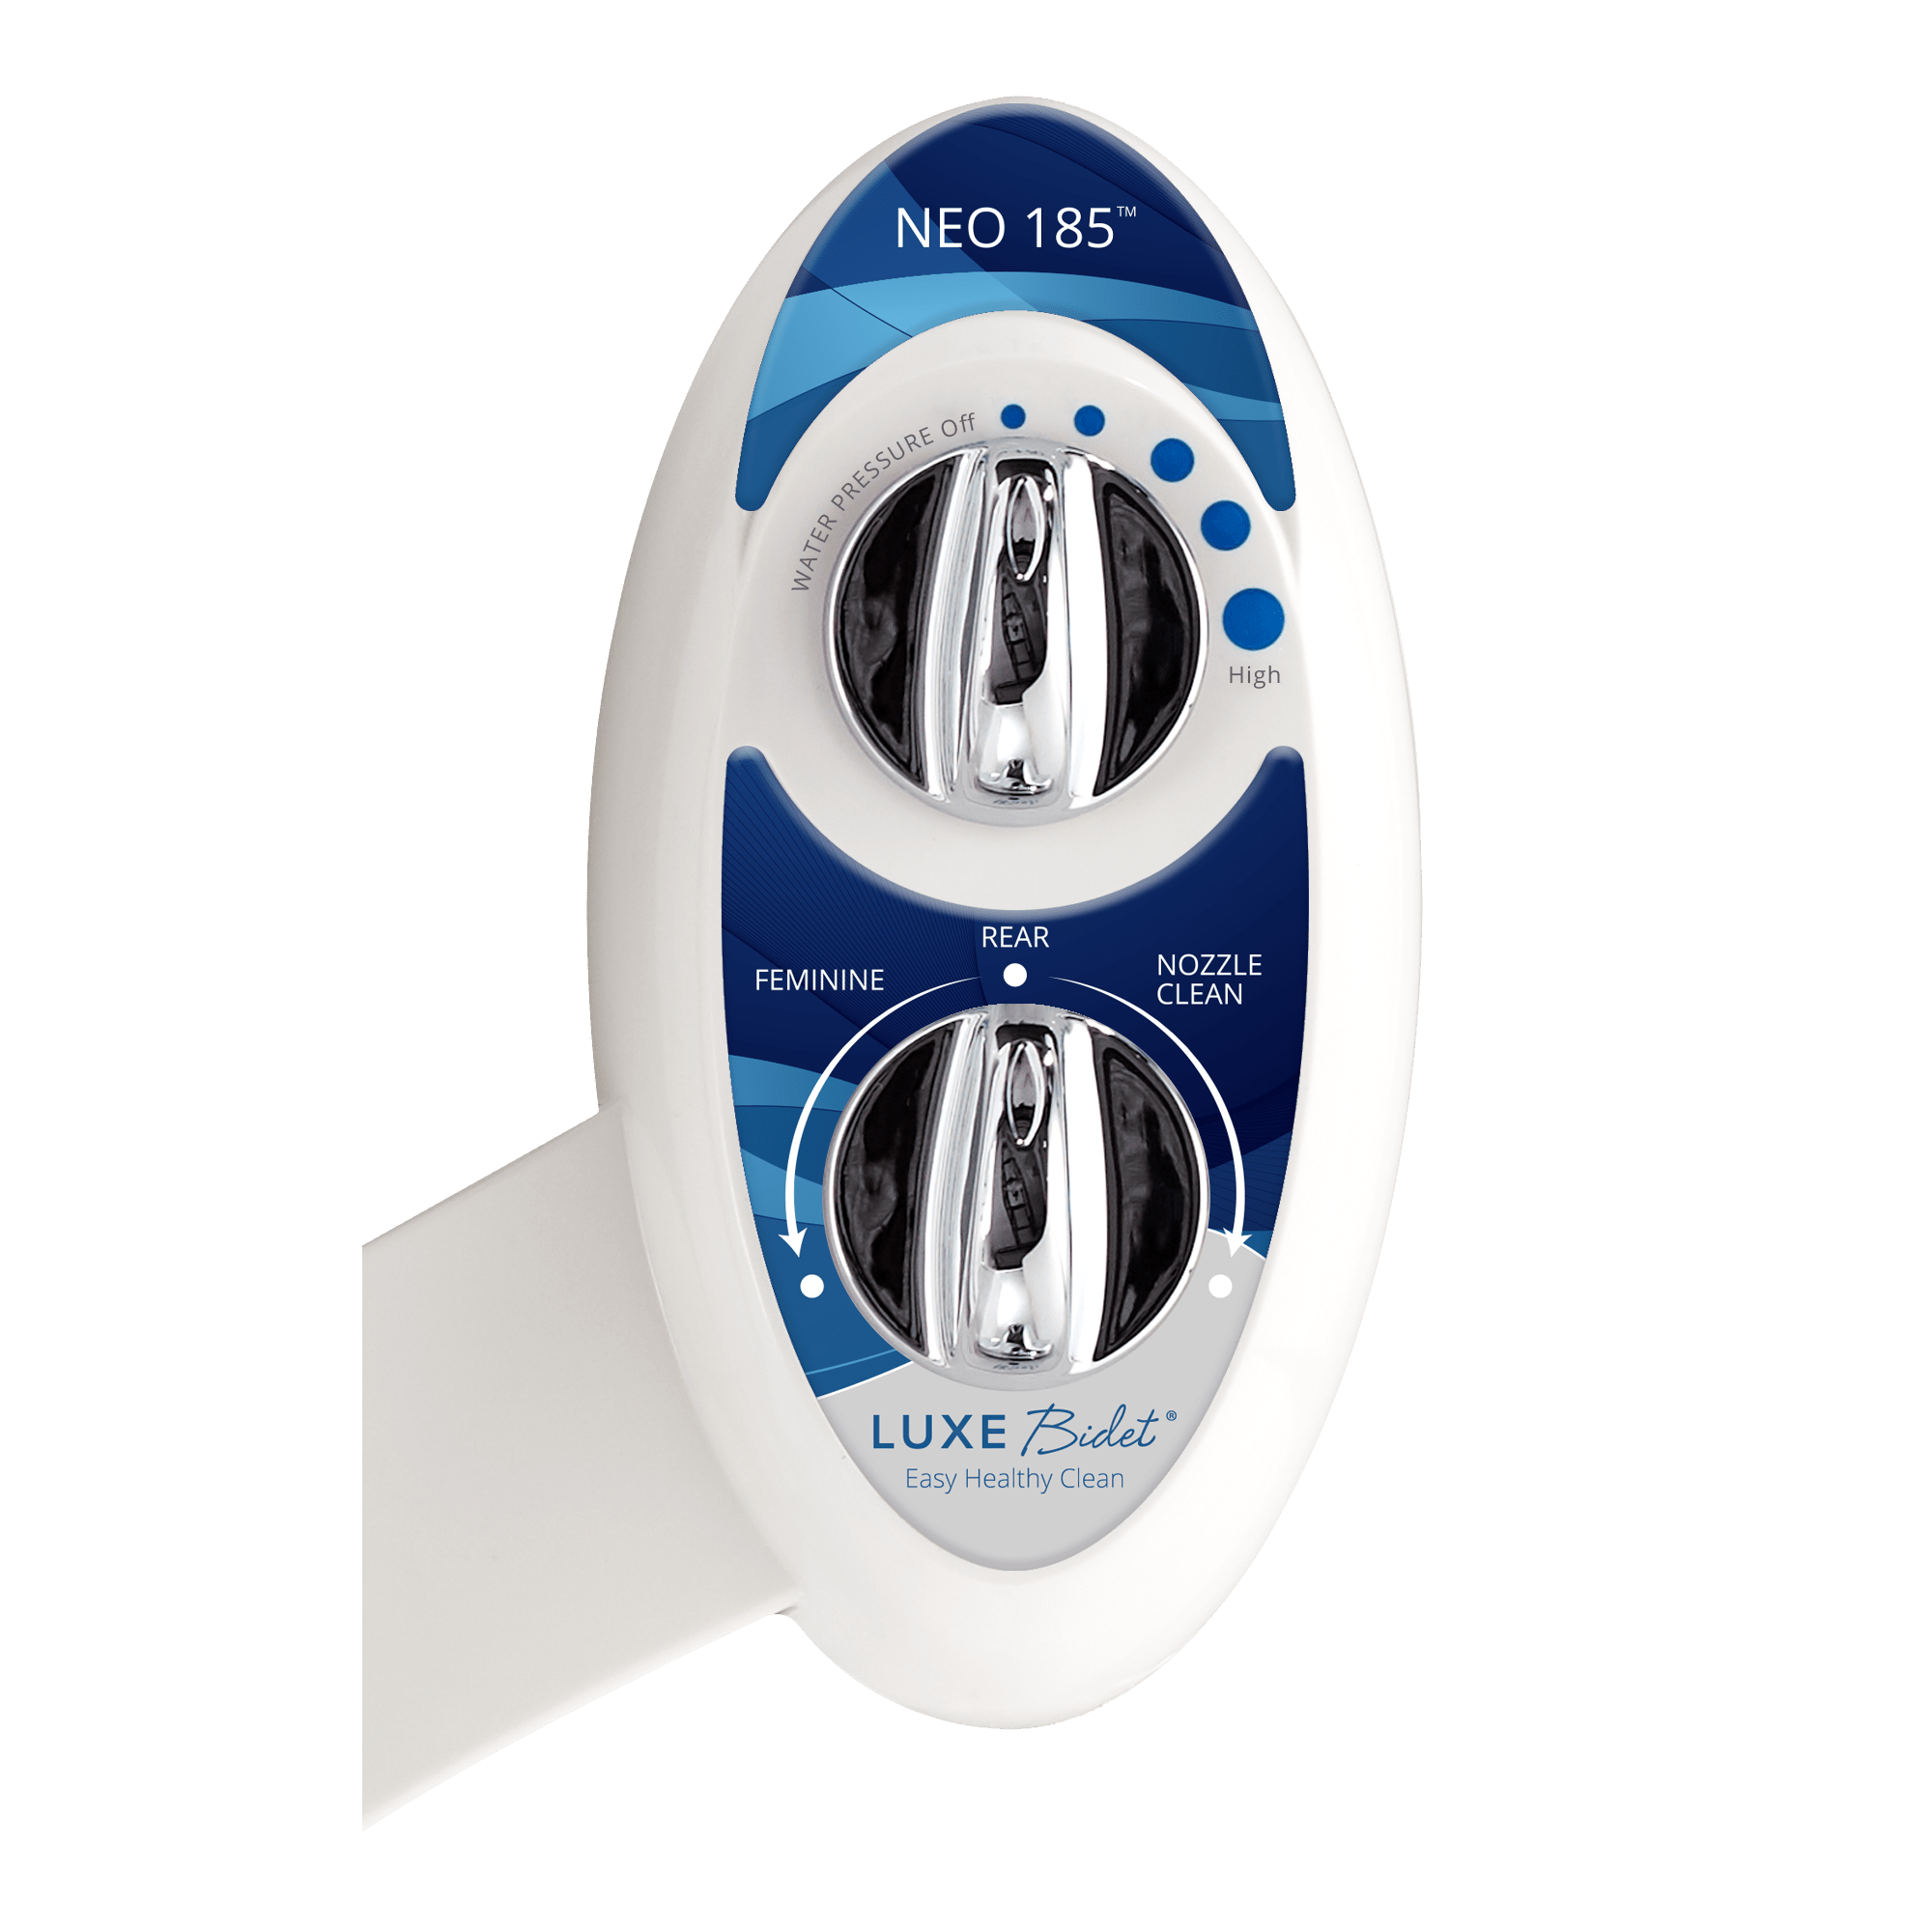 NEO Series: Sticker Labels - NEO 185 Blue control panel